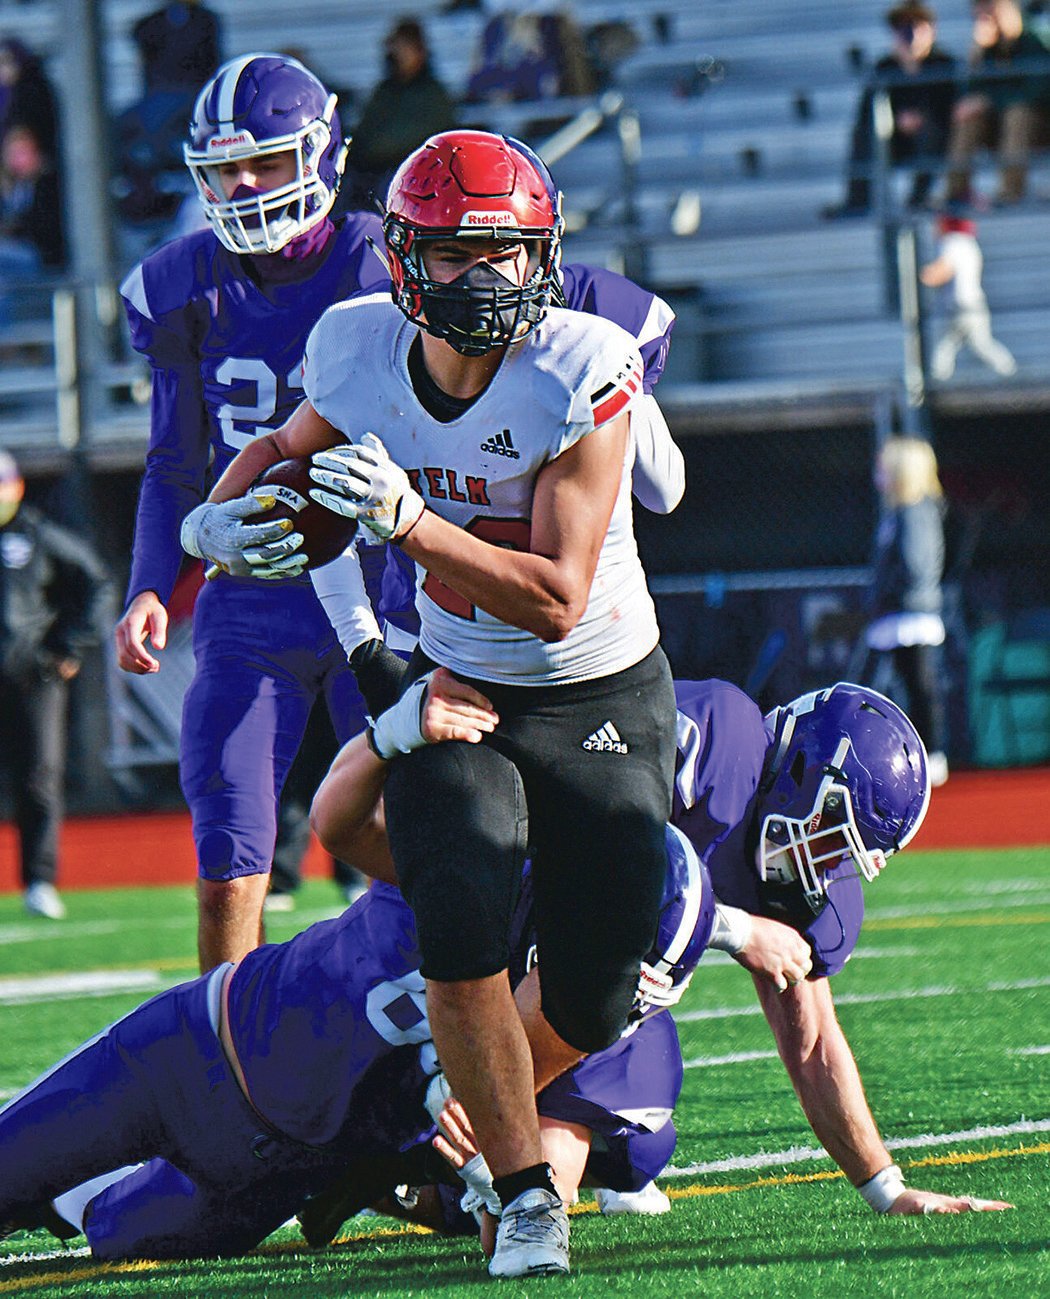 Brayden Platt runs in for a two-point conversion after a touchdown against North Thurston High School in March of 2021 at South Sound Stadium.